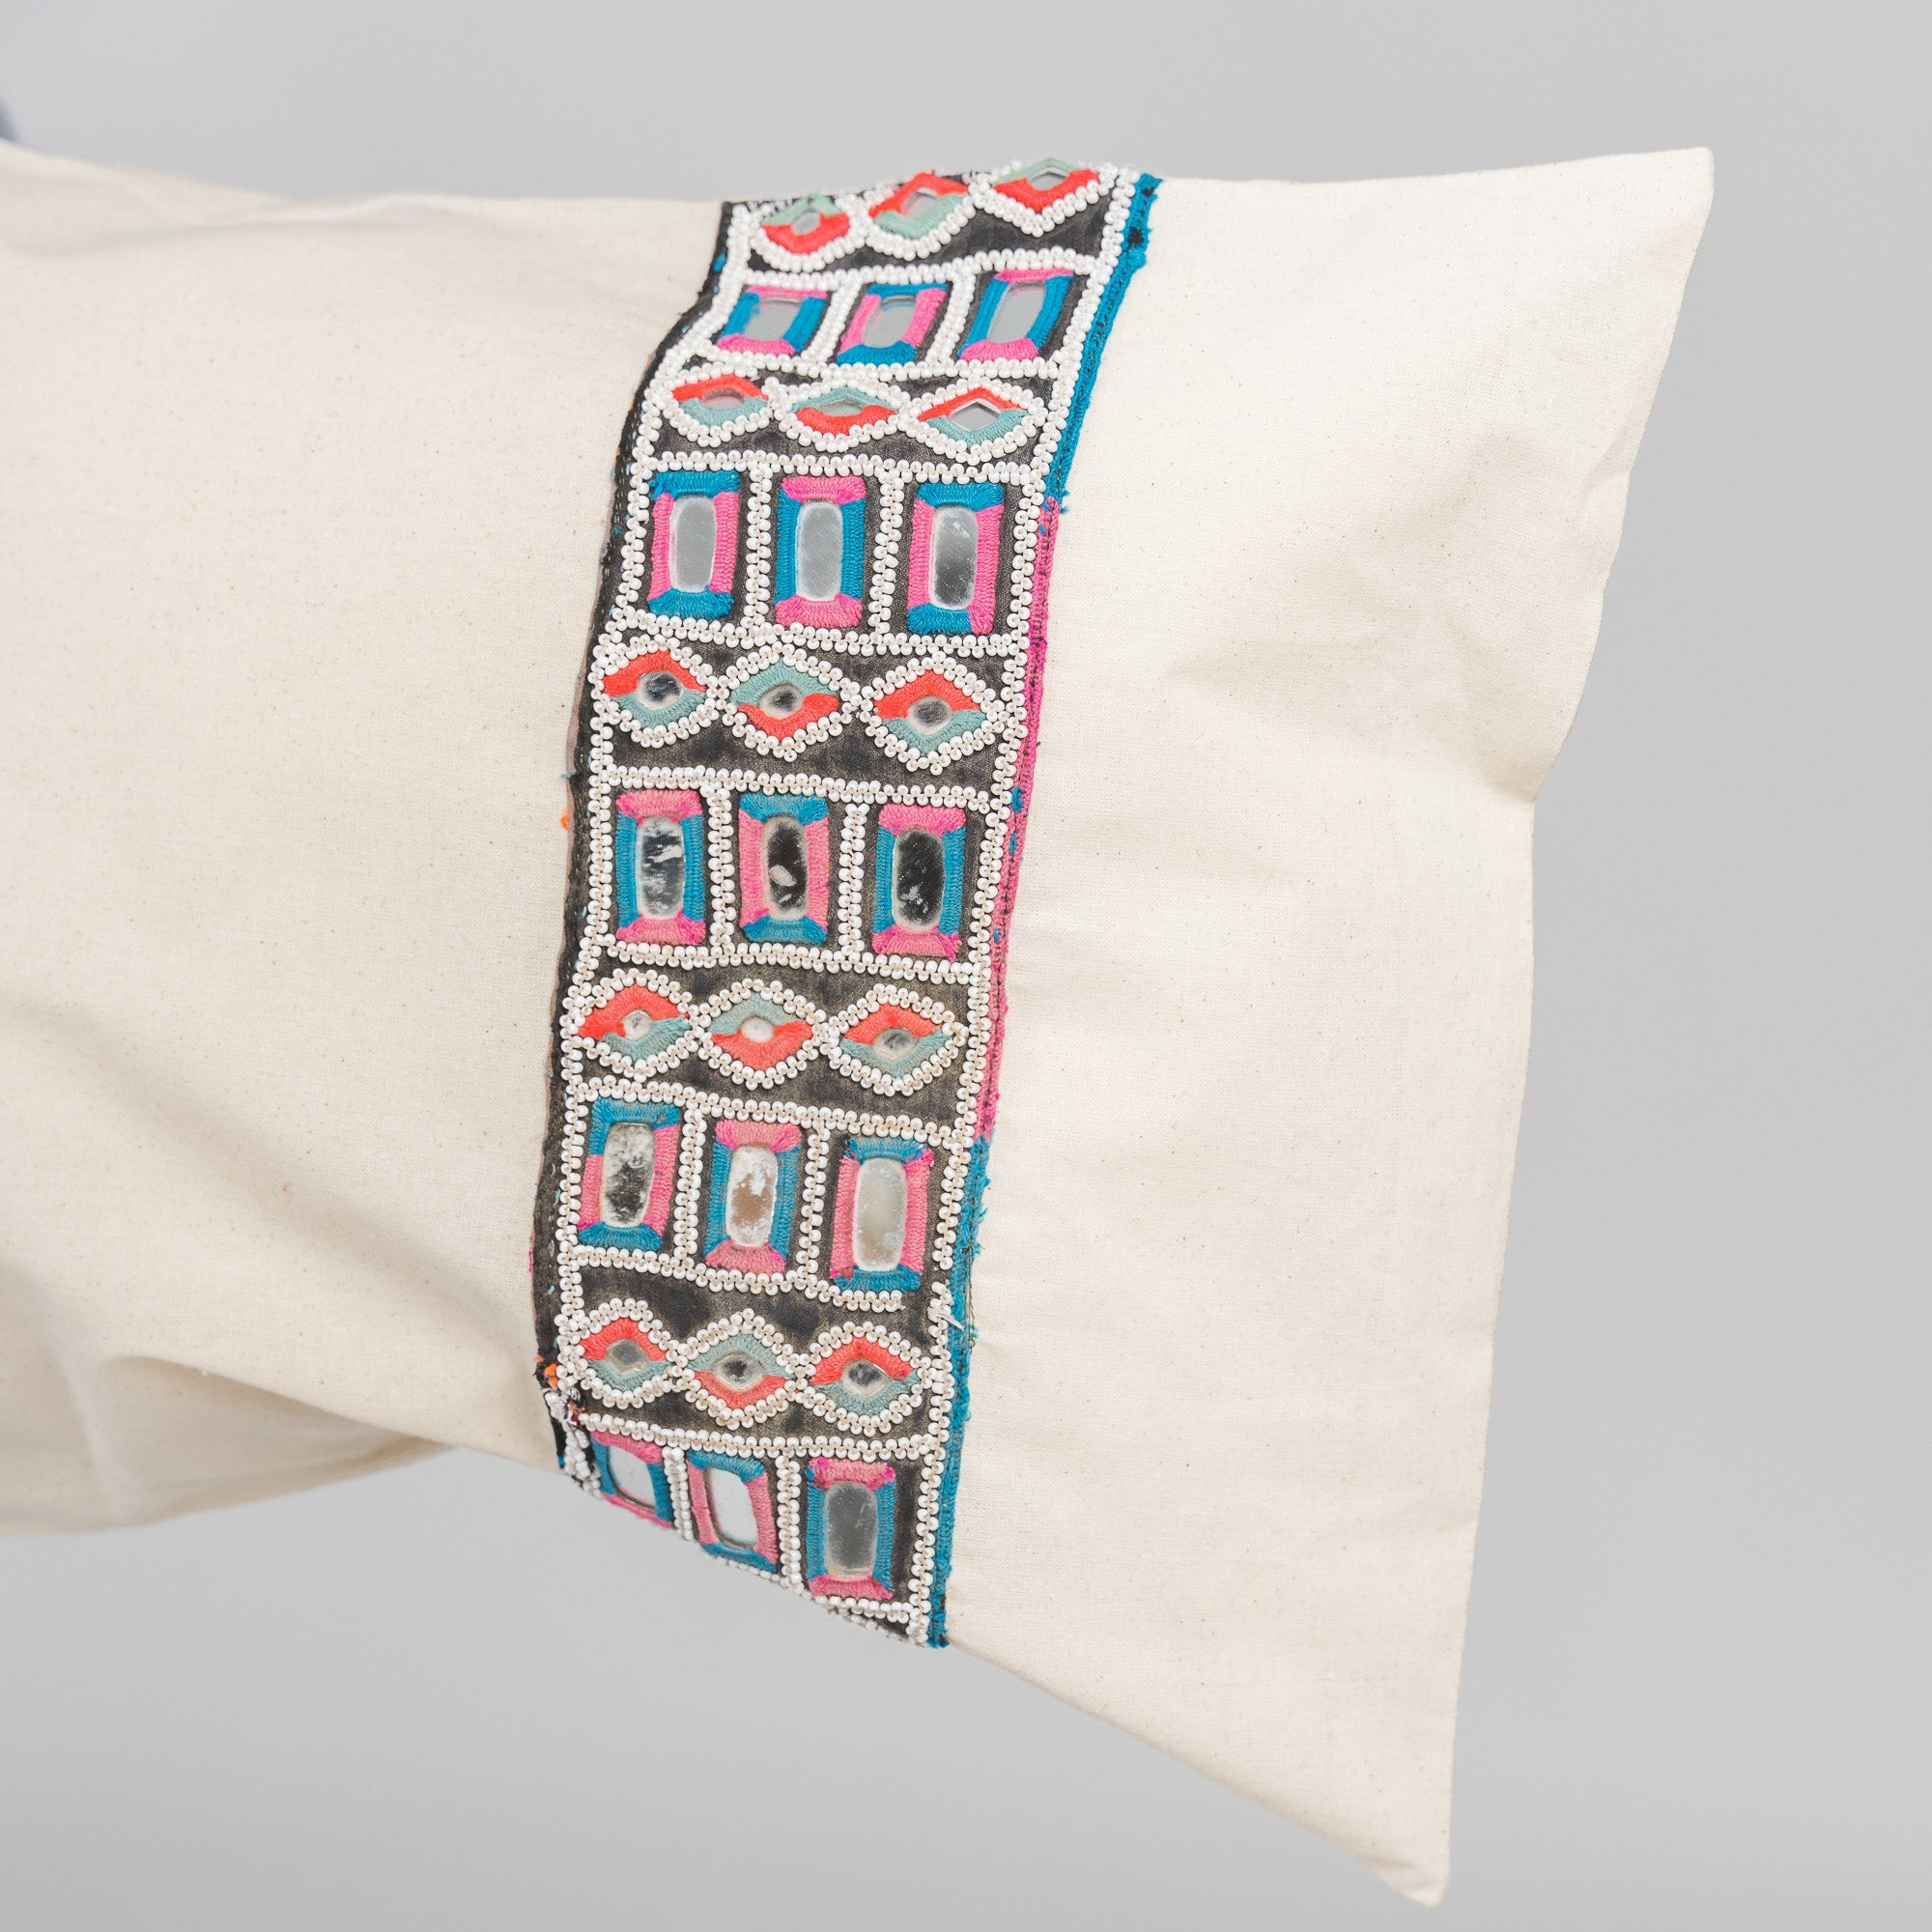 bespoke pillows with vintage embroidered trims